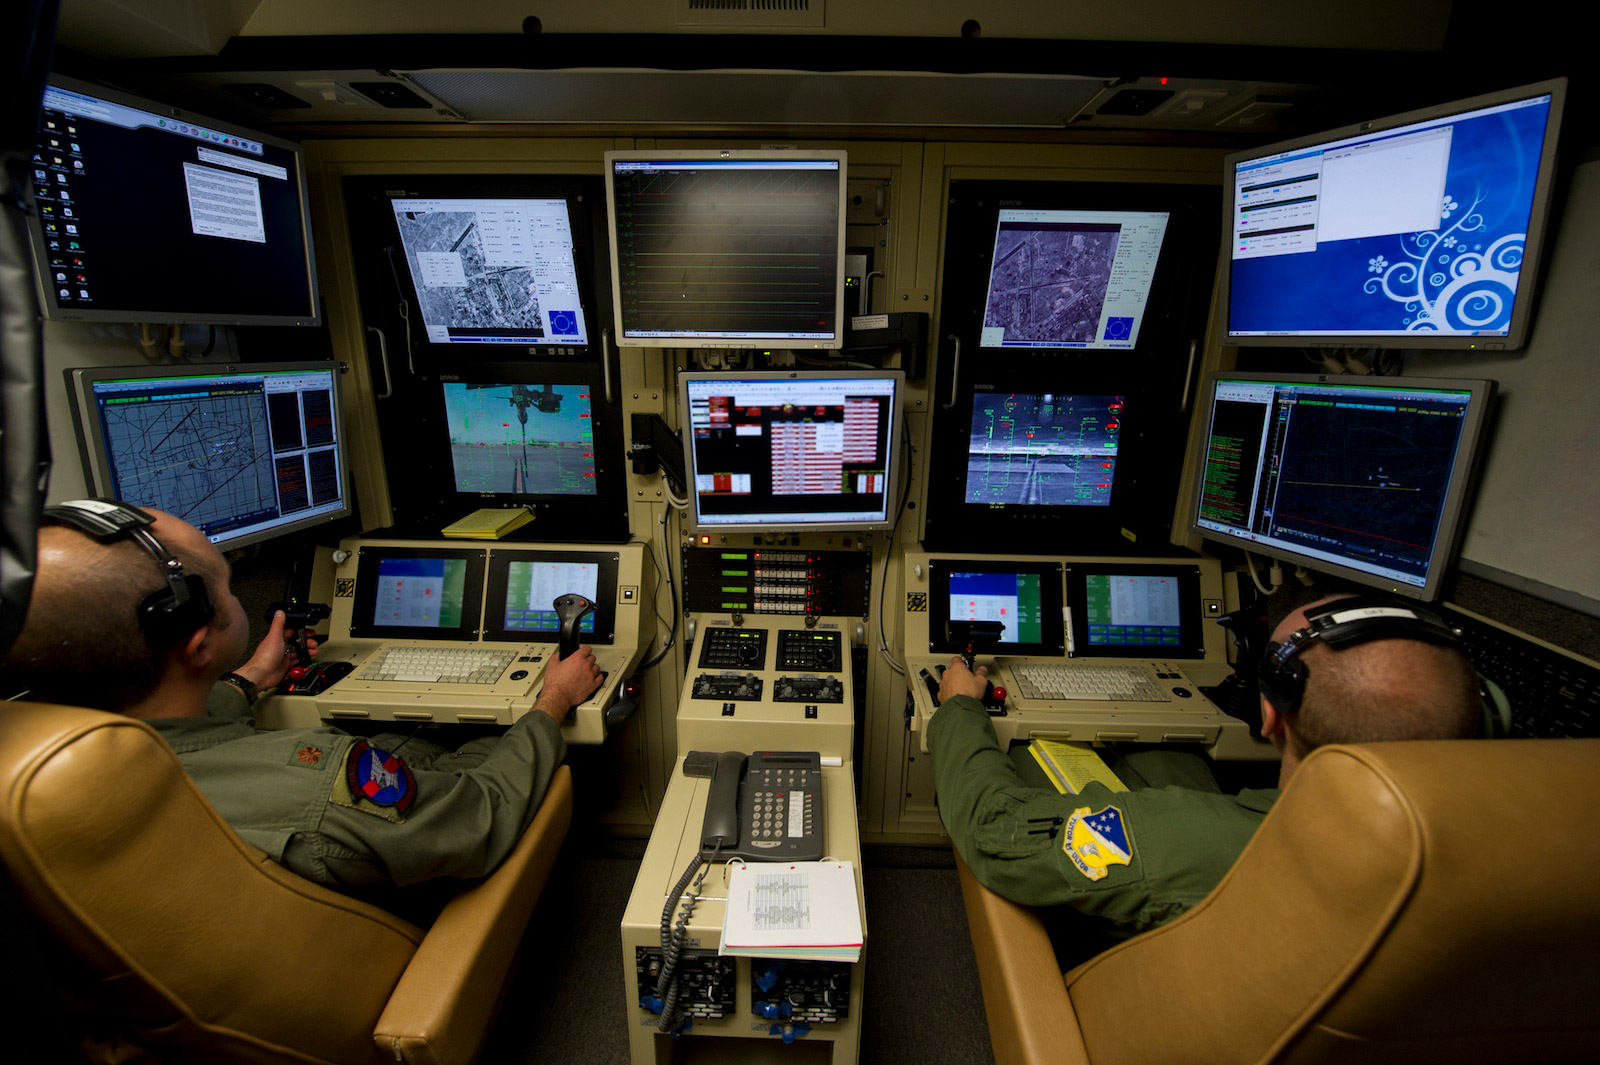 A twothousand and twelve photograph showing two United States airmen at New Mexico’s Holloman Air Force Base training to operate the MQ-9 Reaper drone.